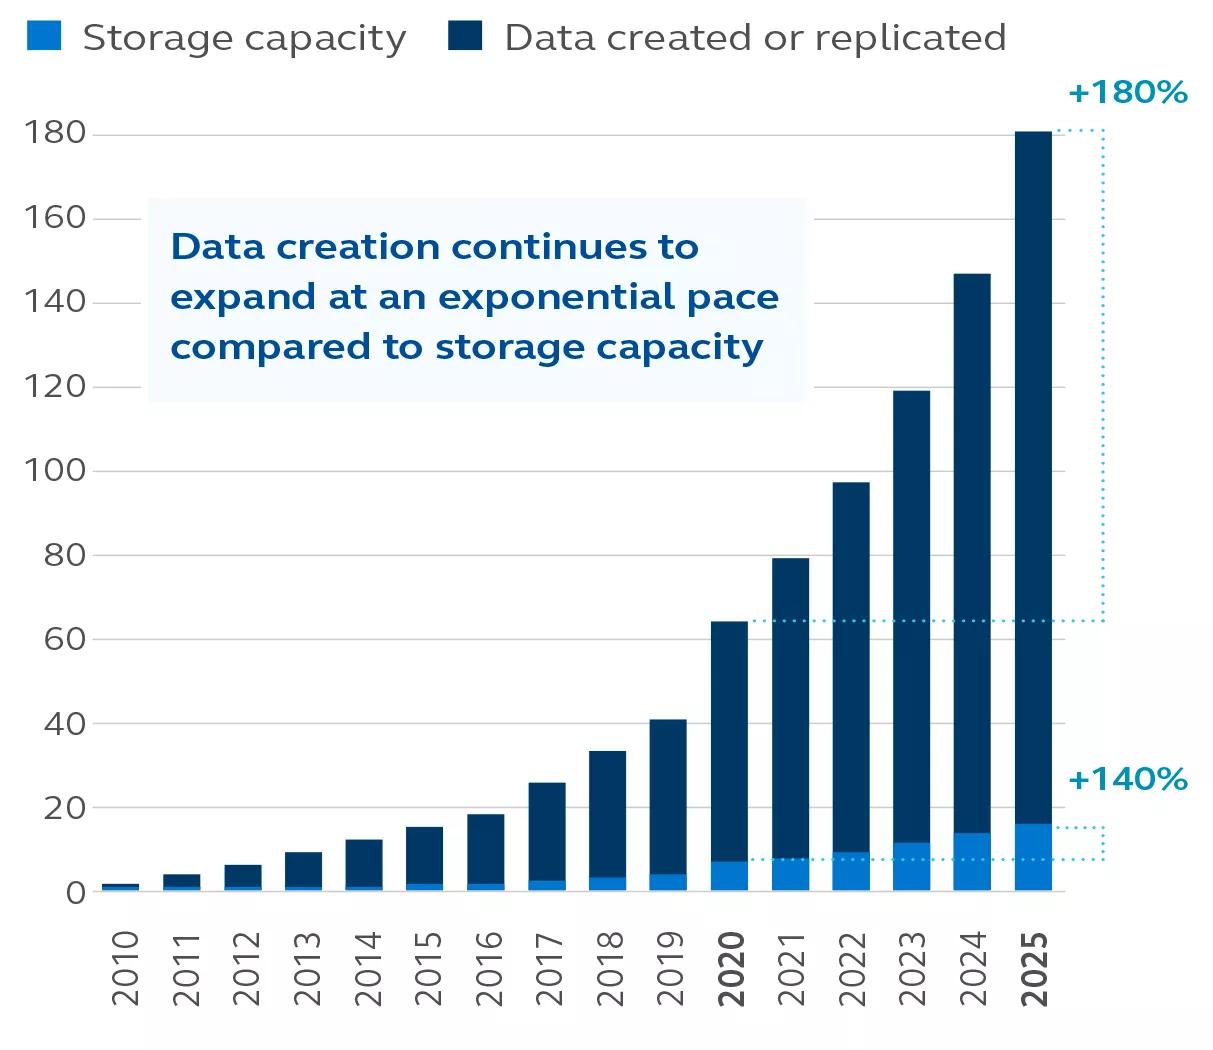 Bar chart showing volume of data generated vs. storage capacity from 2010 to 2025 (projected)